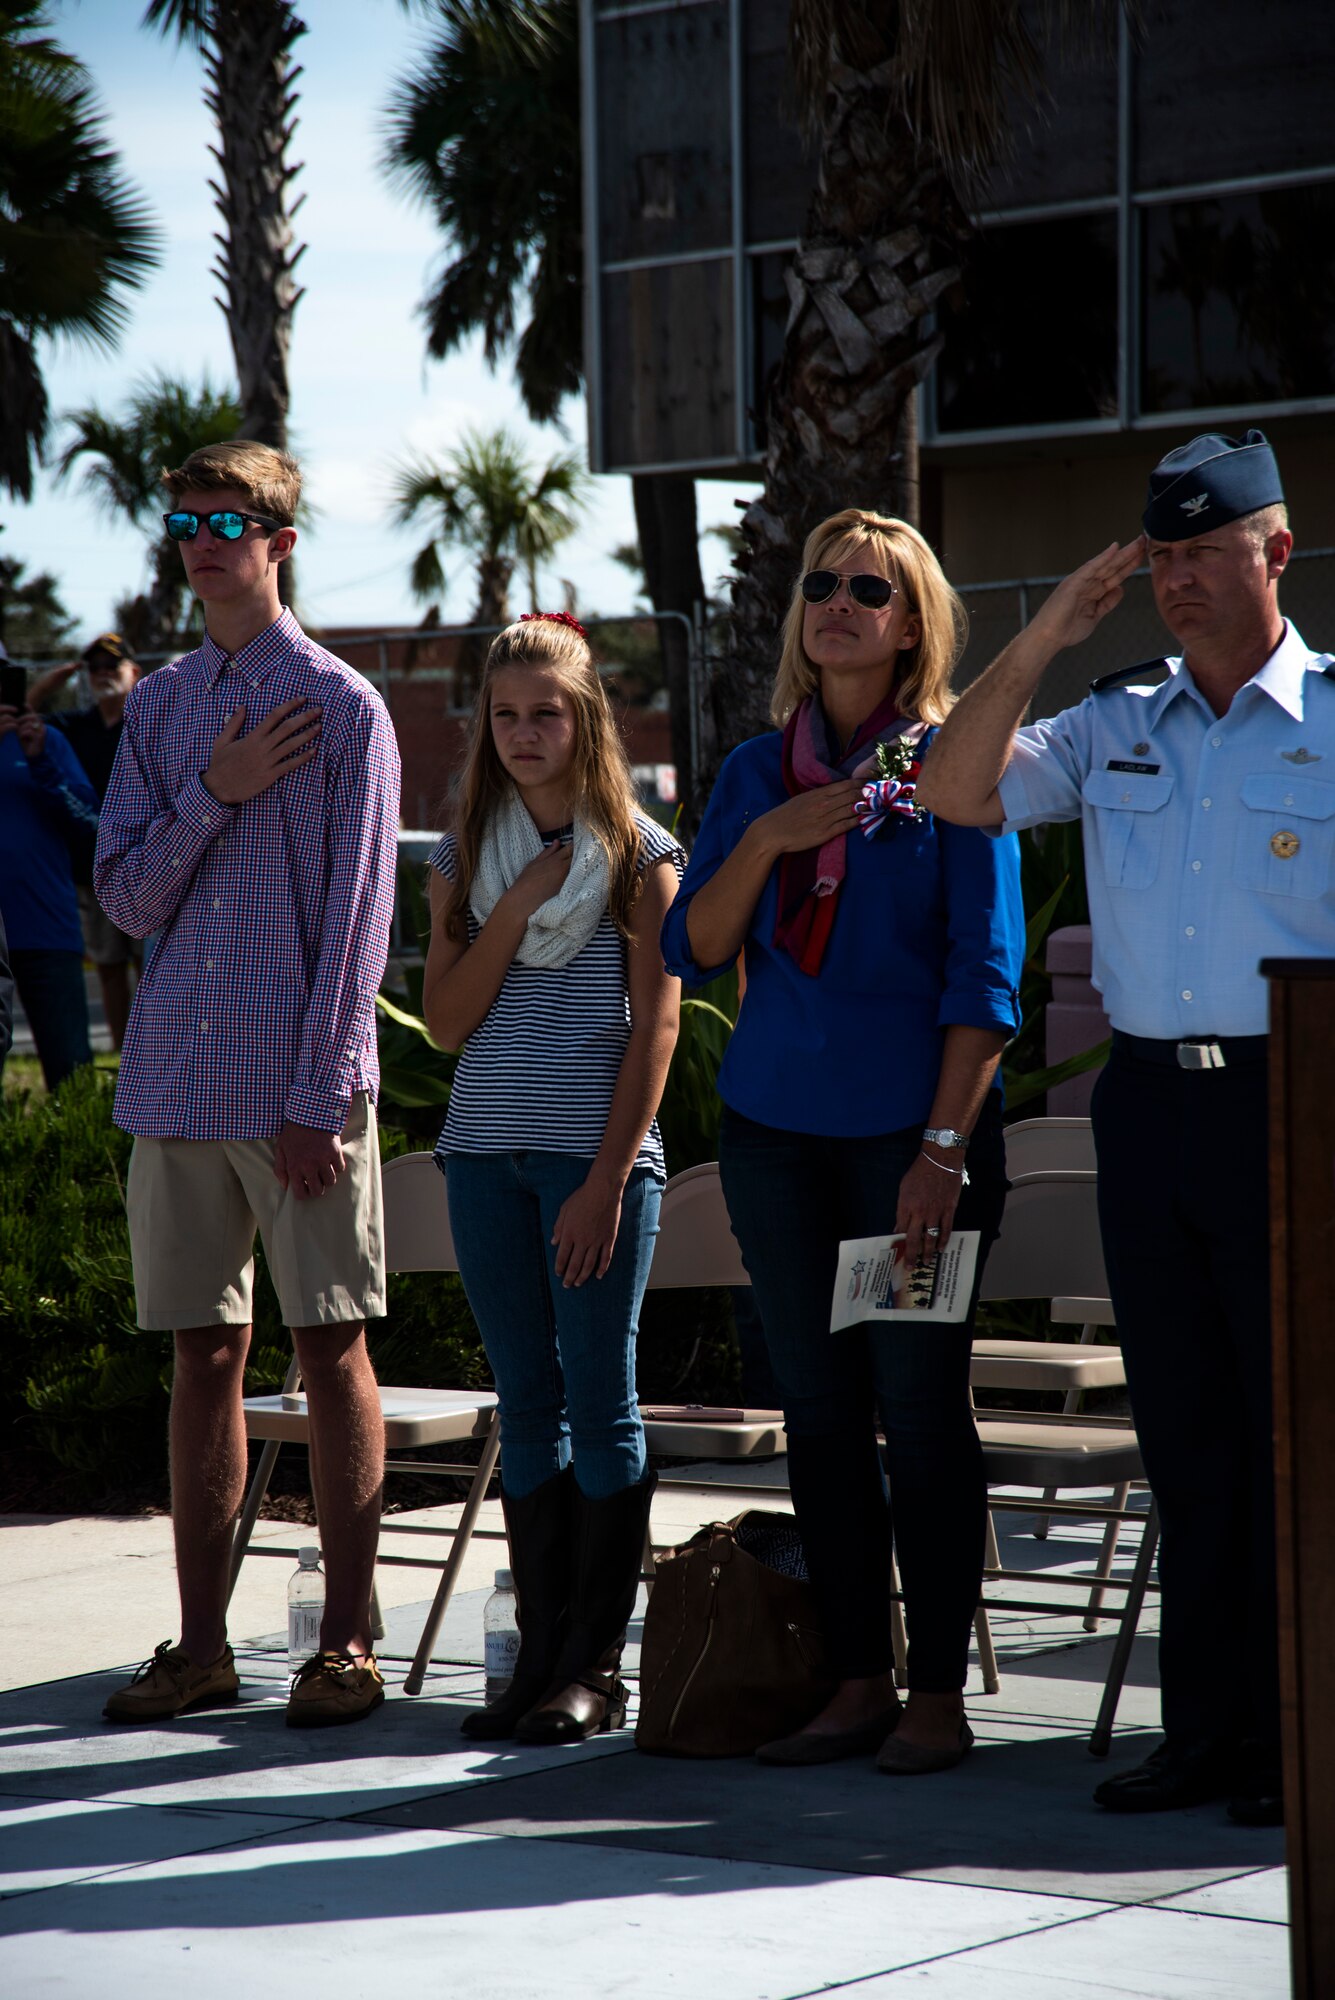 Col. Brian Laidlaw, 325th Fighter Wing commander, salutes the United States flag during the National Anthem and his family hold their hands over their hearts at the annual Veterans Day parade celebration and wreath laying ceremony on Nov. 11, 2019, at Panama City, Florida. The annual event celebrated those who served in the past and to honor the sacrifices made by the service member as well as their families, both at home and abroad. During the ceremony, Laidlaw highlighted the dedication families made as they supported their loved ones' service. Laidlaw identified that the military is a family business because families support the nation's defense as well. Laidlaw was accompanied by his wife Samantha, daughter Taylor and son Braden. (U.S. Air Force photo by Staff Sgt. Magen M. Reeves)